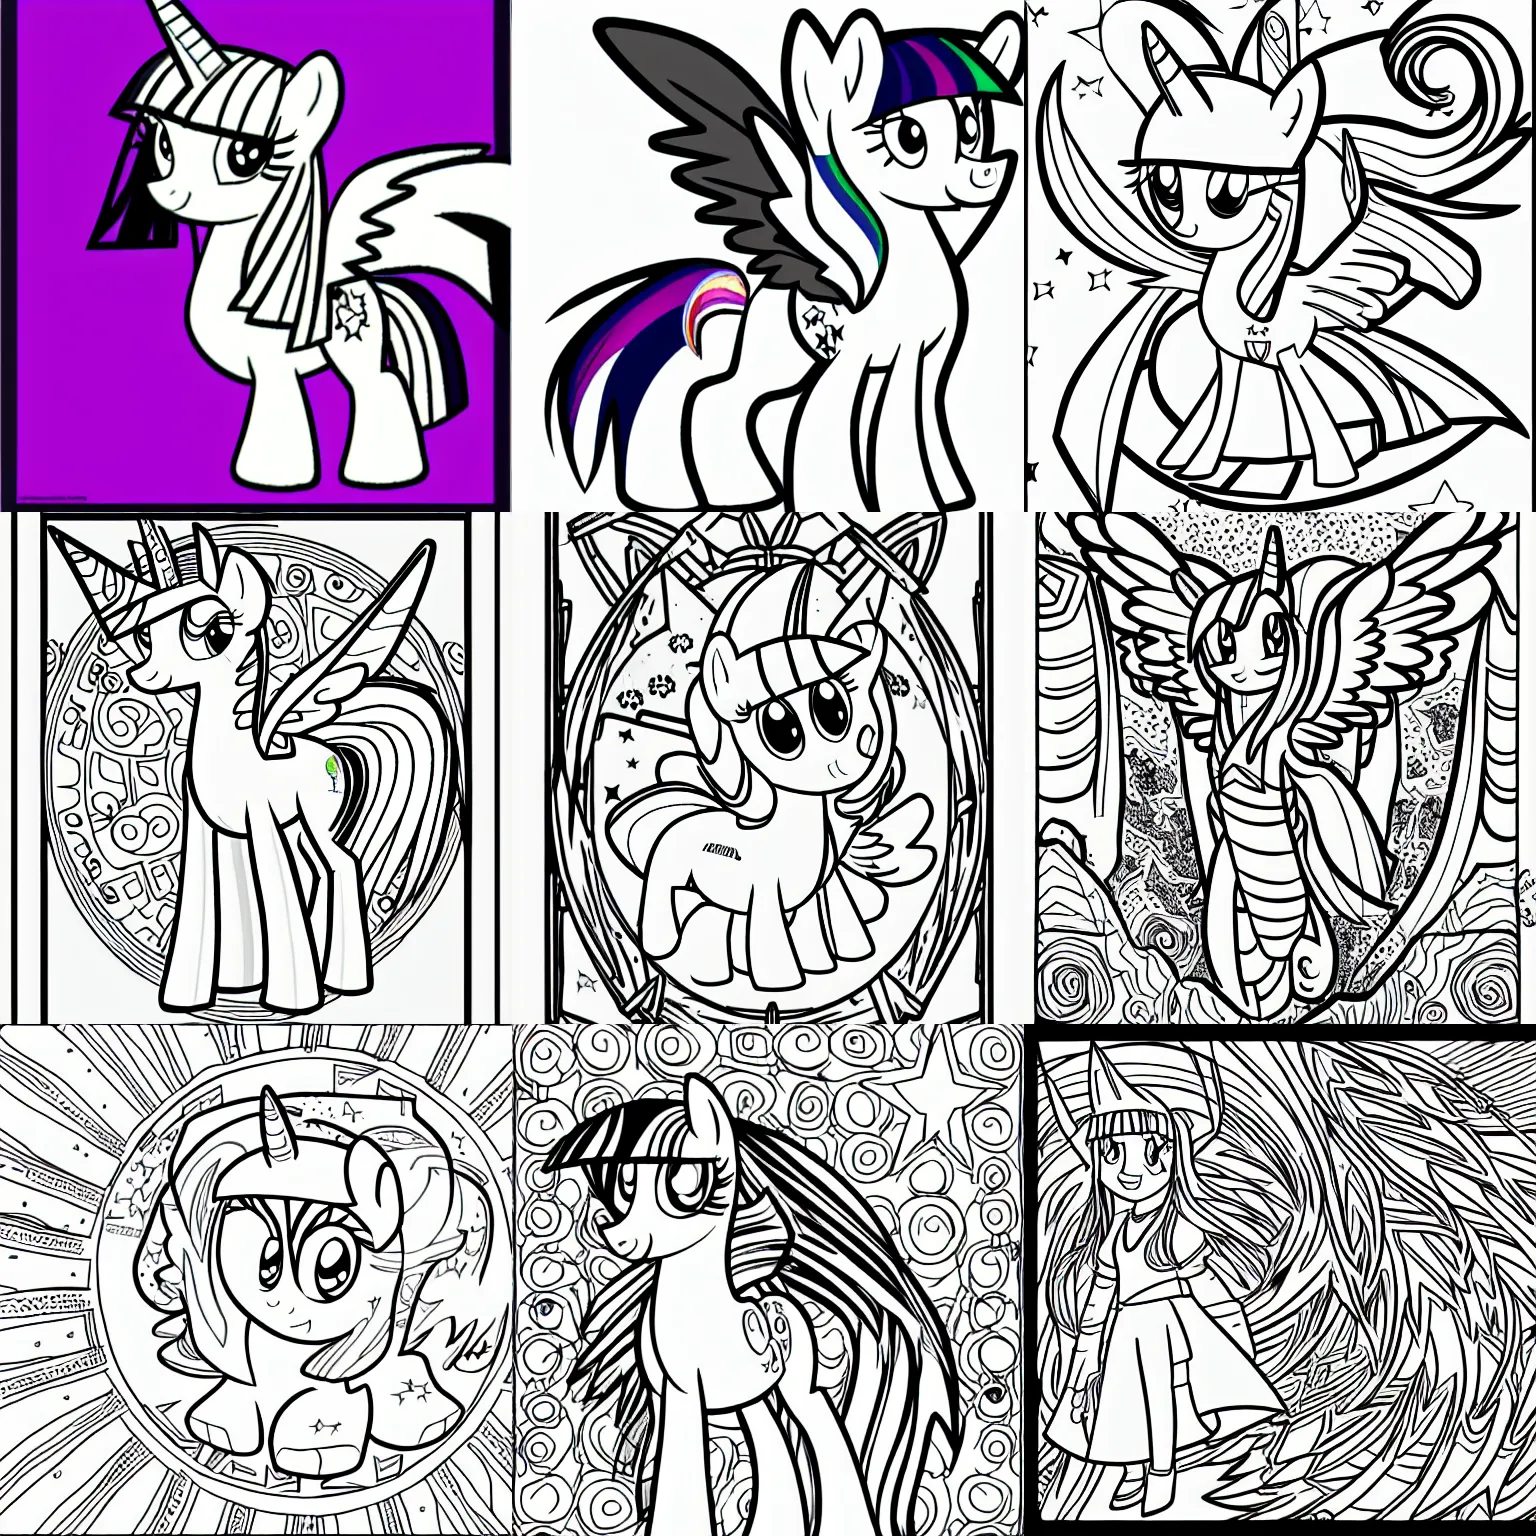 Prompt: Twilight Sparkle, uncolored black and white page from a coloring book